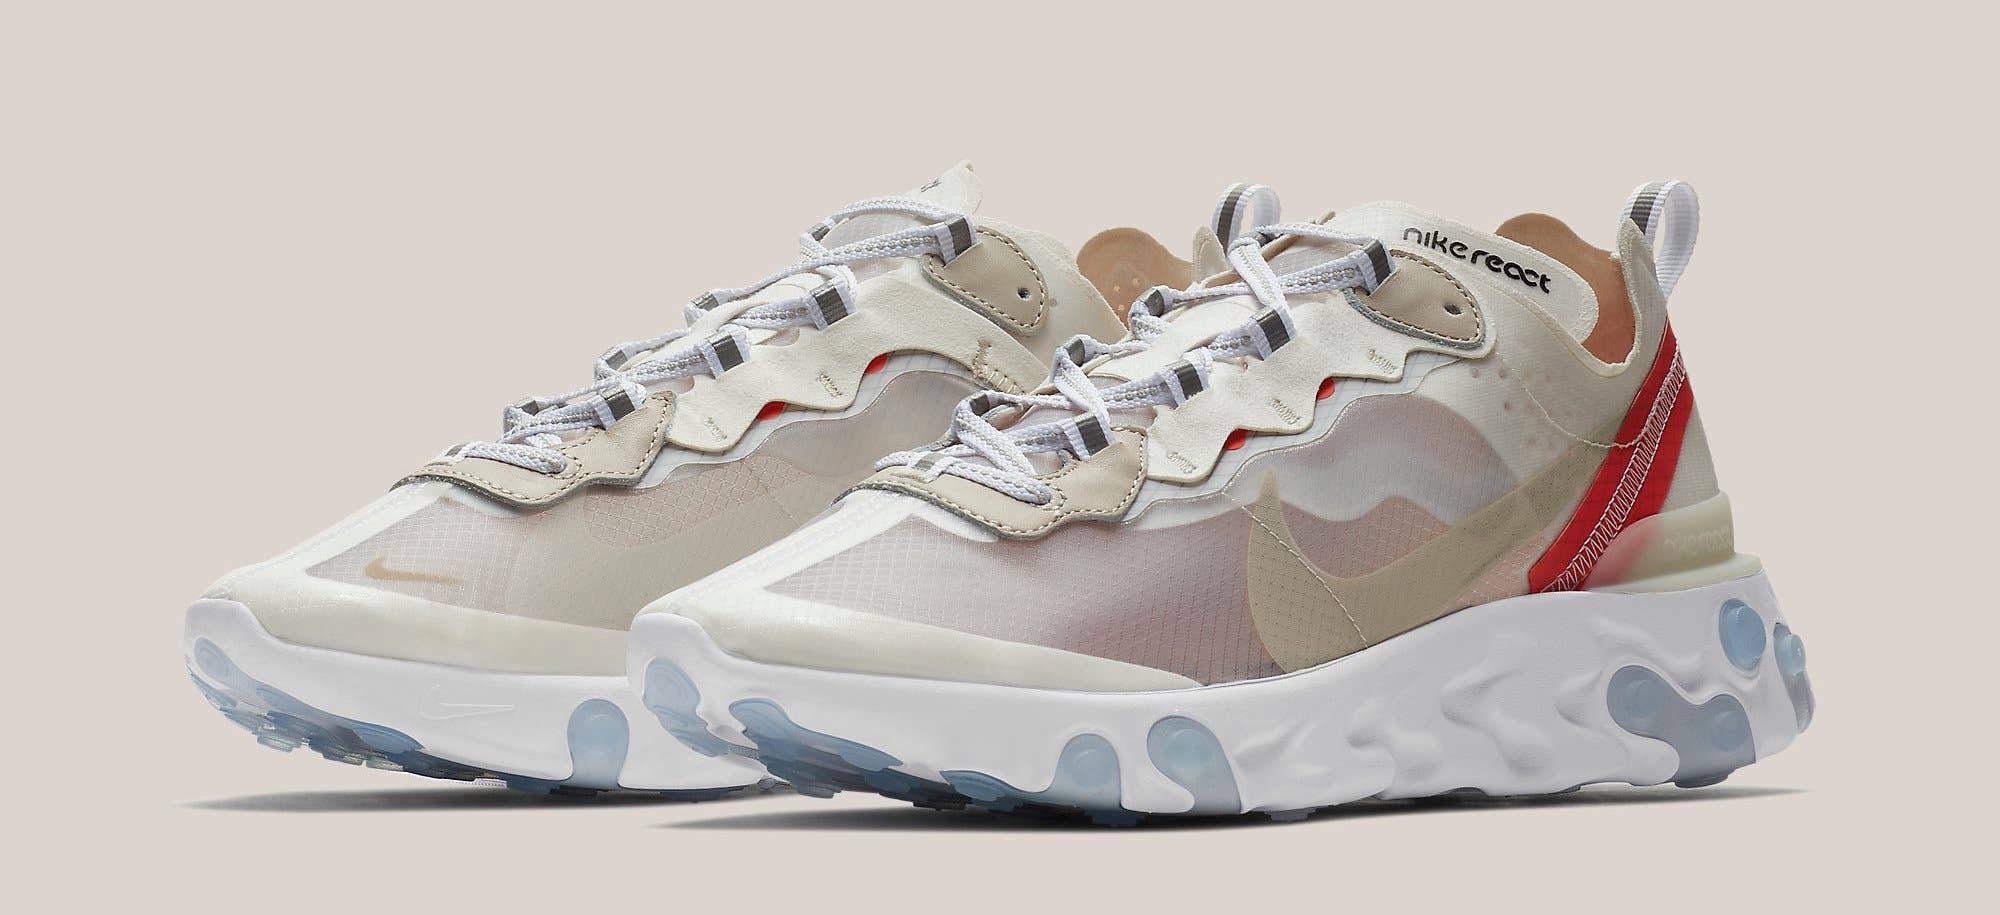 Best Look Yet the Nike React Element 87s Complex